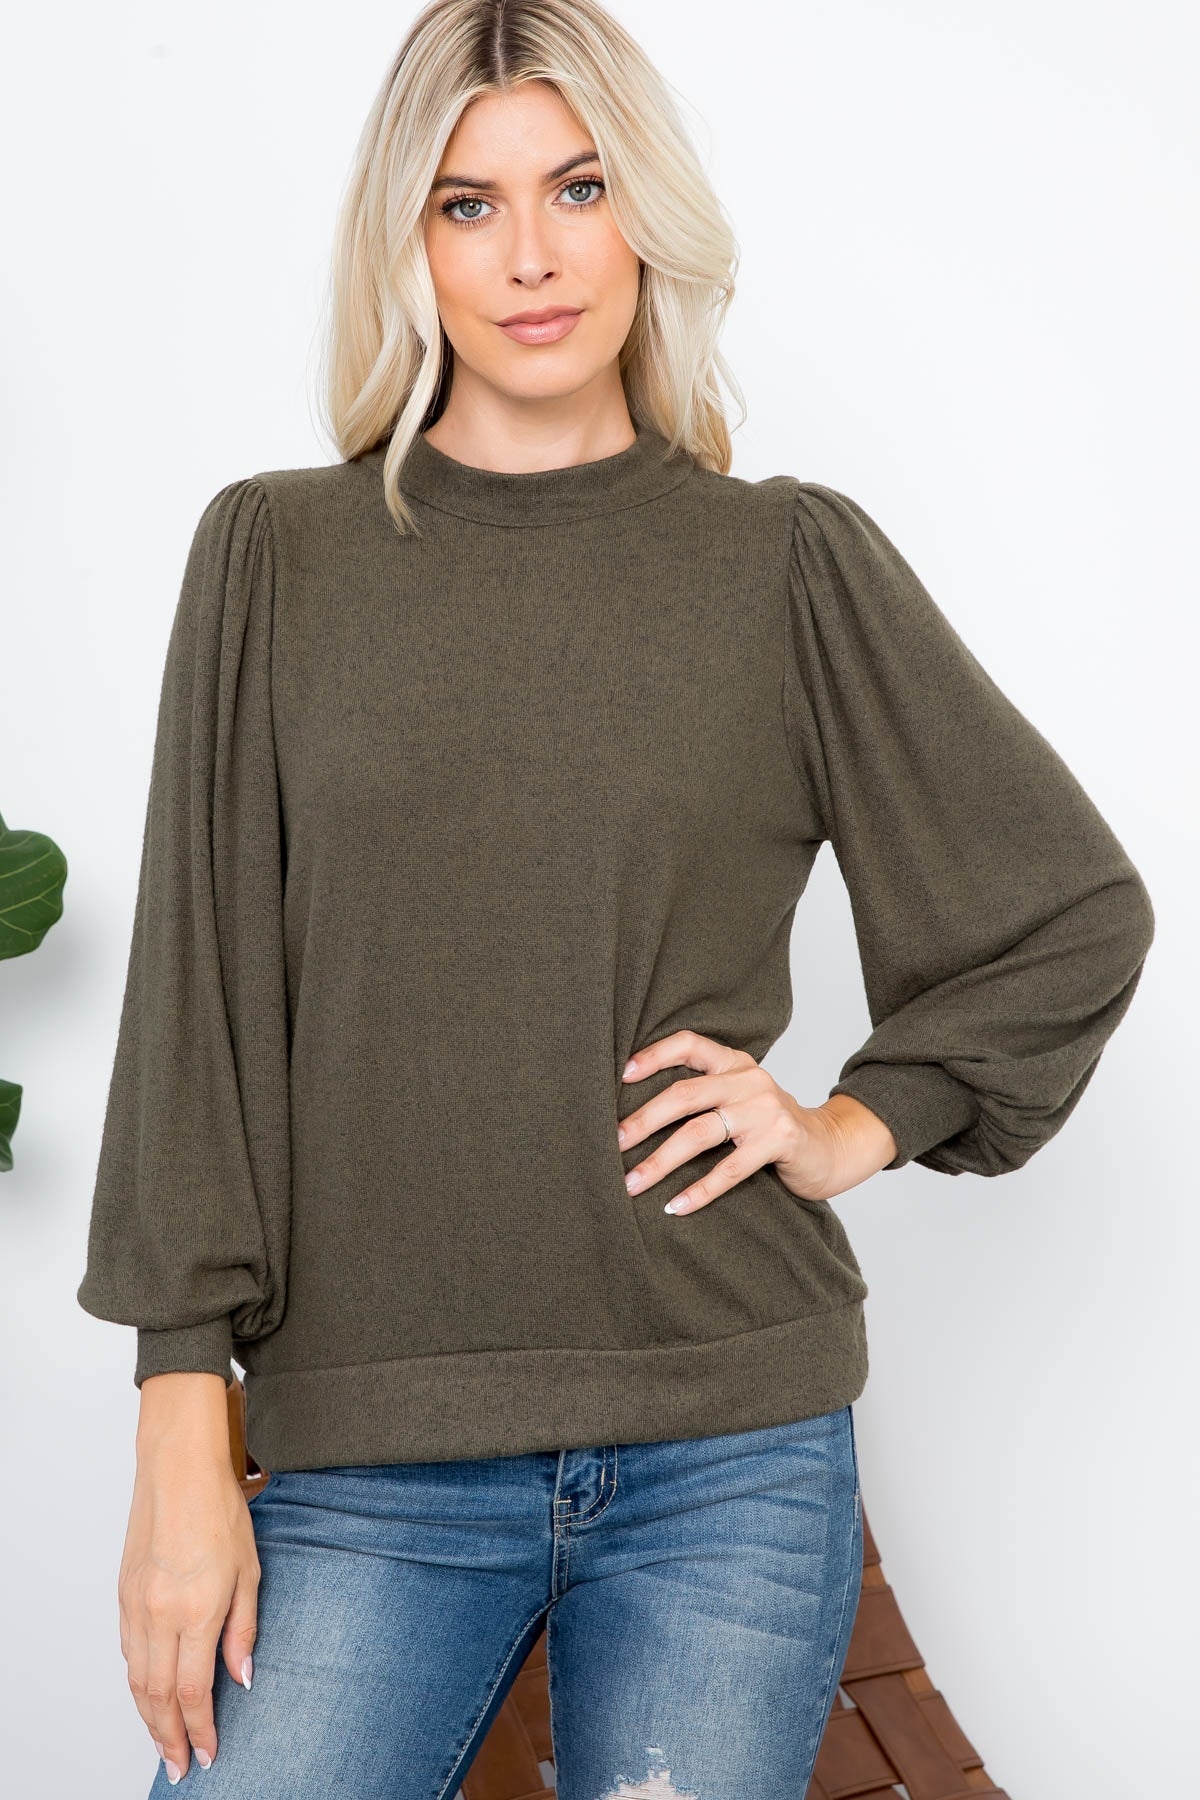 CREW NECK PUFF SLEEVE TOP 1-2-2-2 (NOW $6.75 ONLY!)